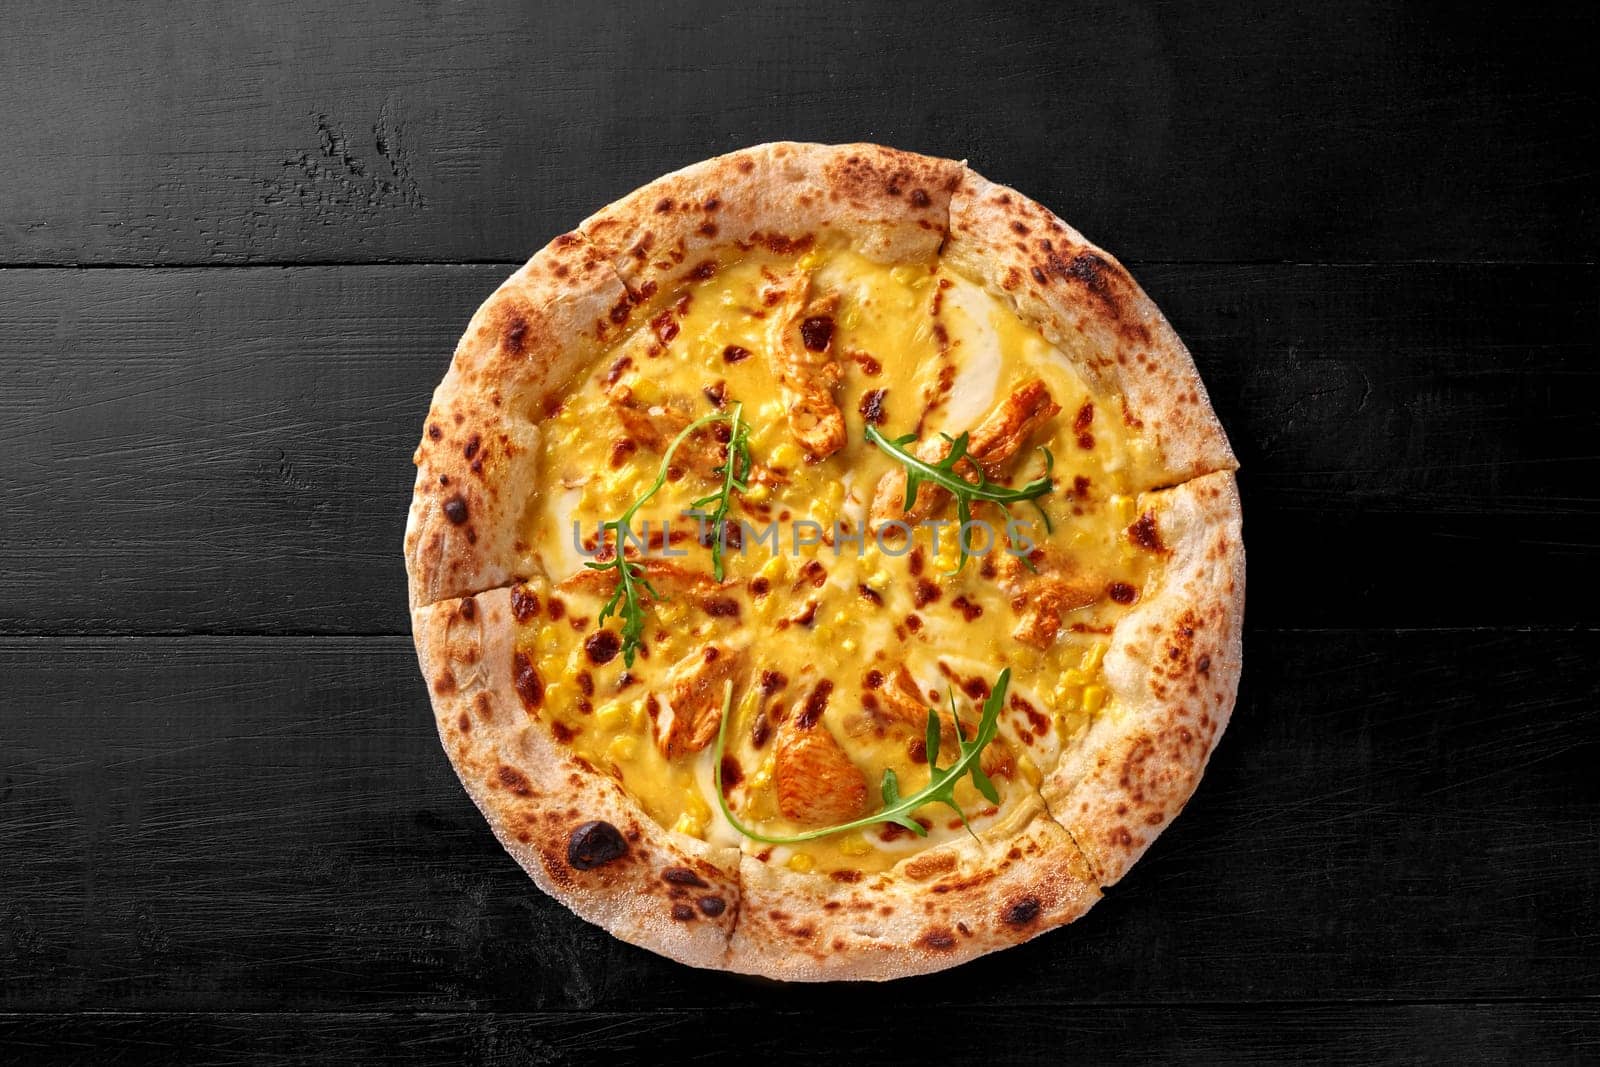 Delicious sous vide chicken pizza on thin dough with corn, browned edge and melted cheese base garnished with fresh green fragrant arugula on black wooden surface, top view